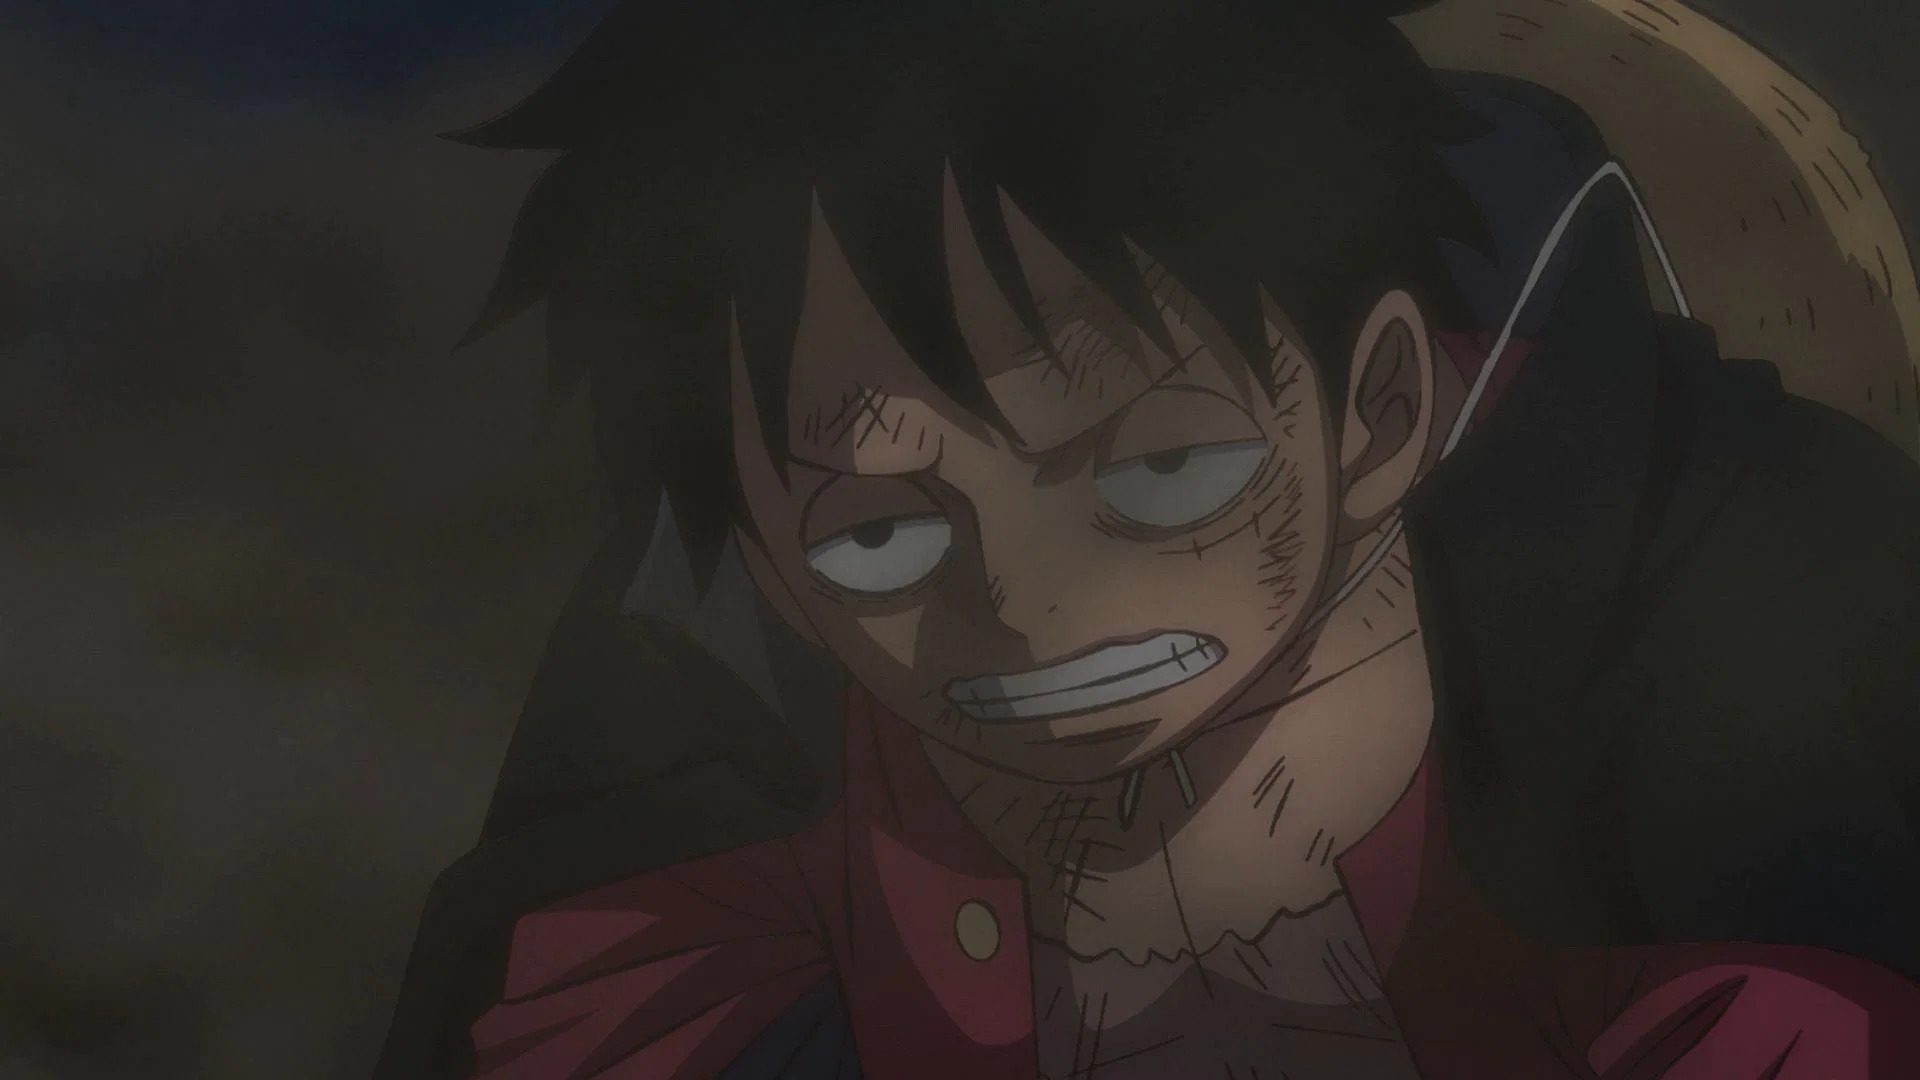 One Piece Episode 1020, June 5 Latest Episode is Now Out